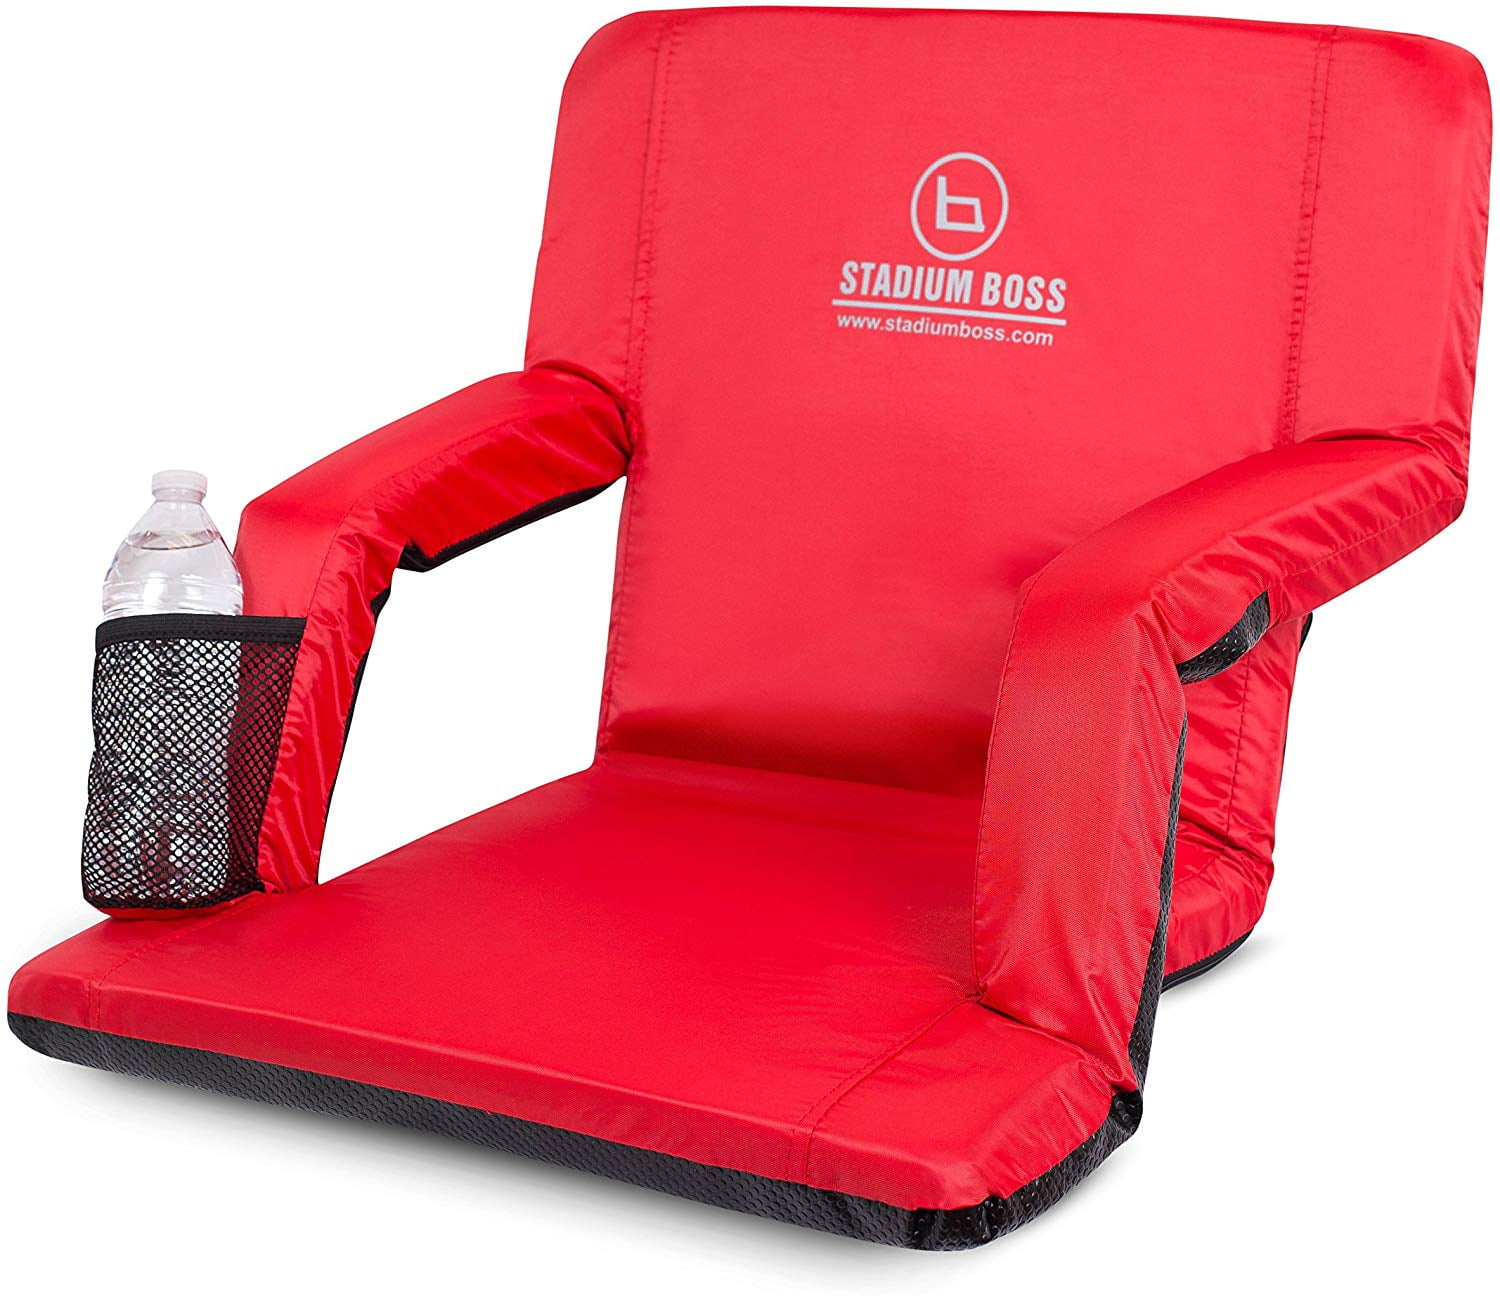 Reclining Seat Red Bleachers 5 Assorted Positions Portable Stadium Seat Chair 